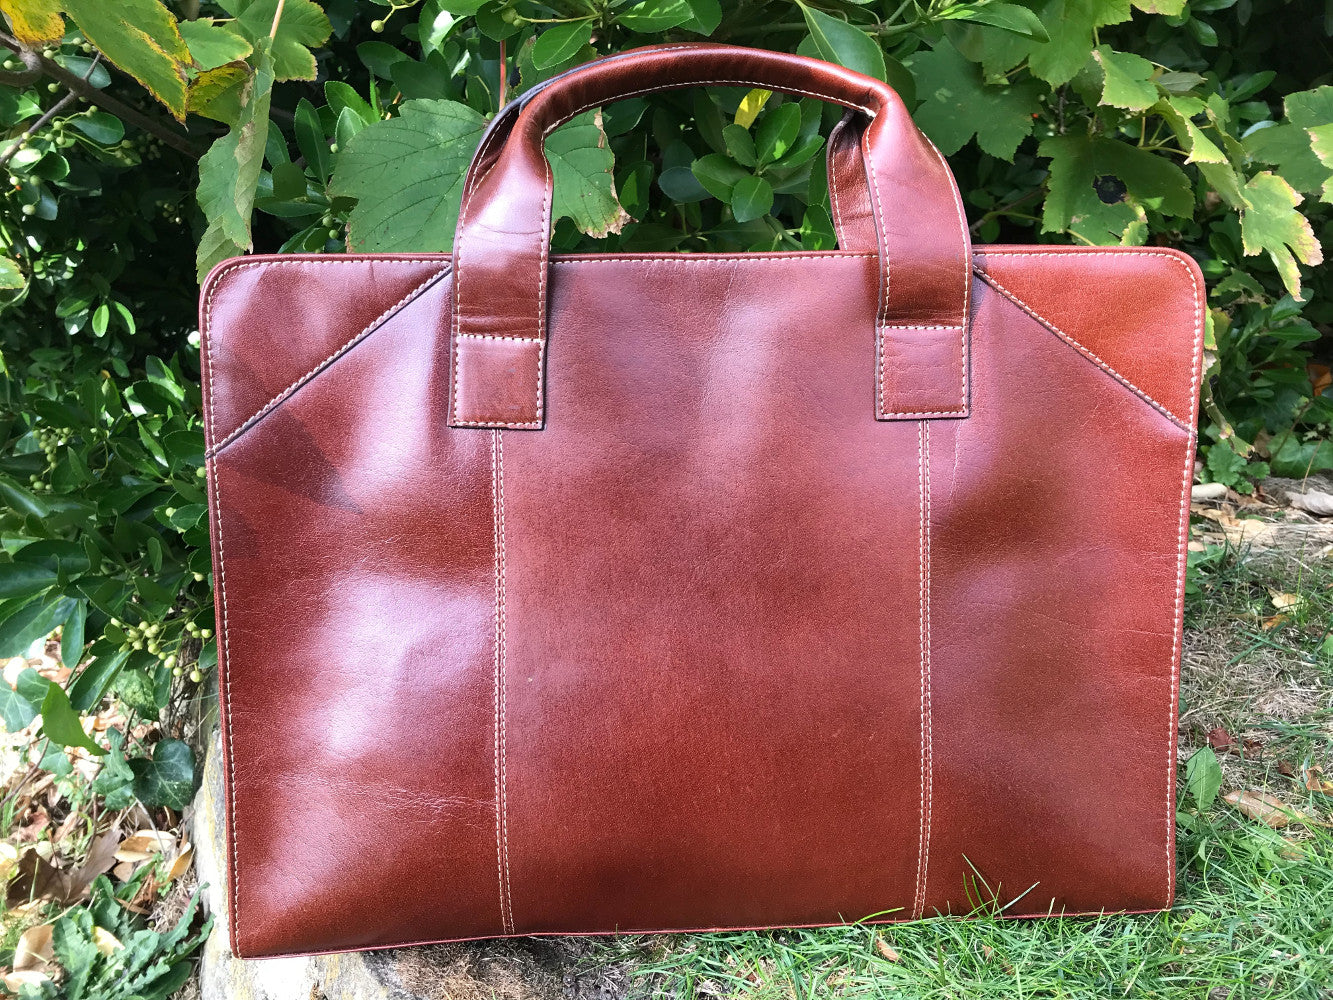 The Easton Briefcase. An elegant and modern work bag by Burghley Bags. Handmade from luxurious chestnut leather, it's large enough for 15" laptops.  Comes with a detachable shoulder strap.